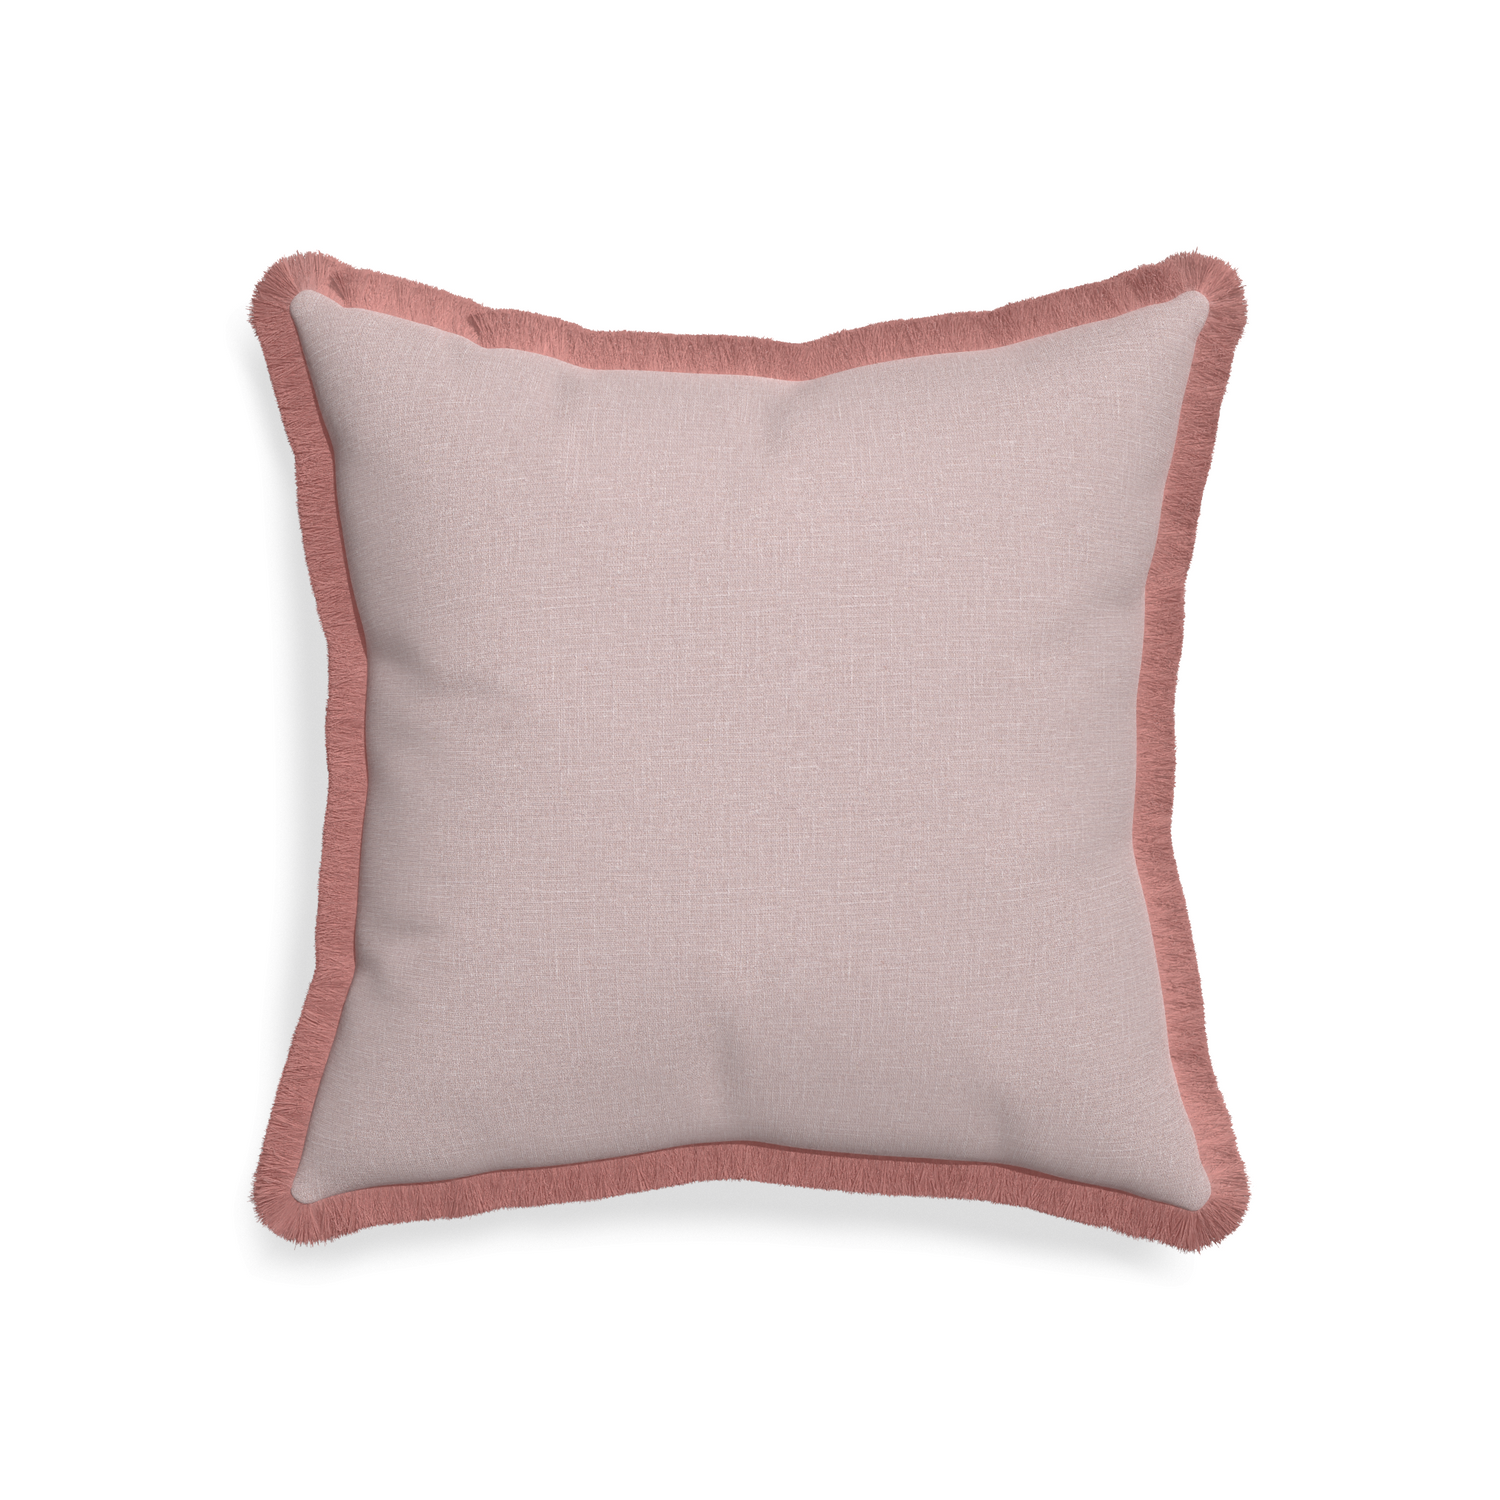 20-square orchid custom mauve pinkpillow with d fringe on white background